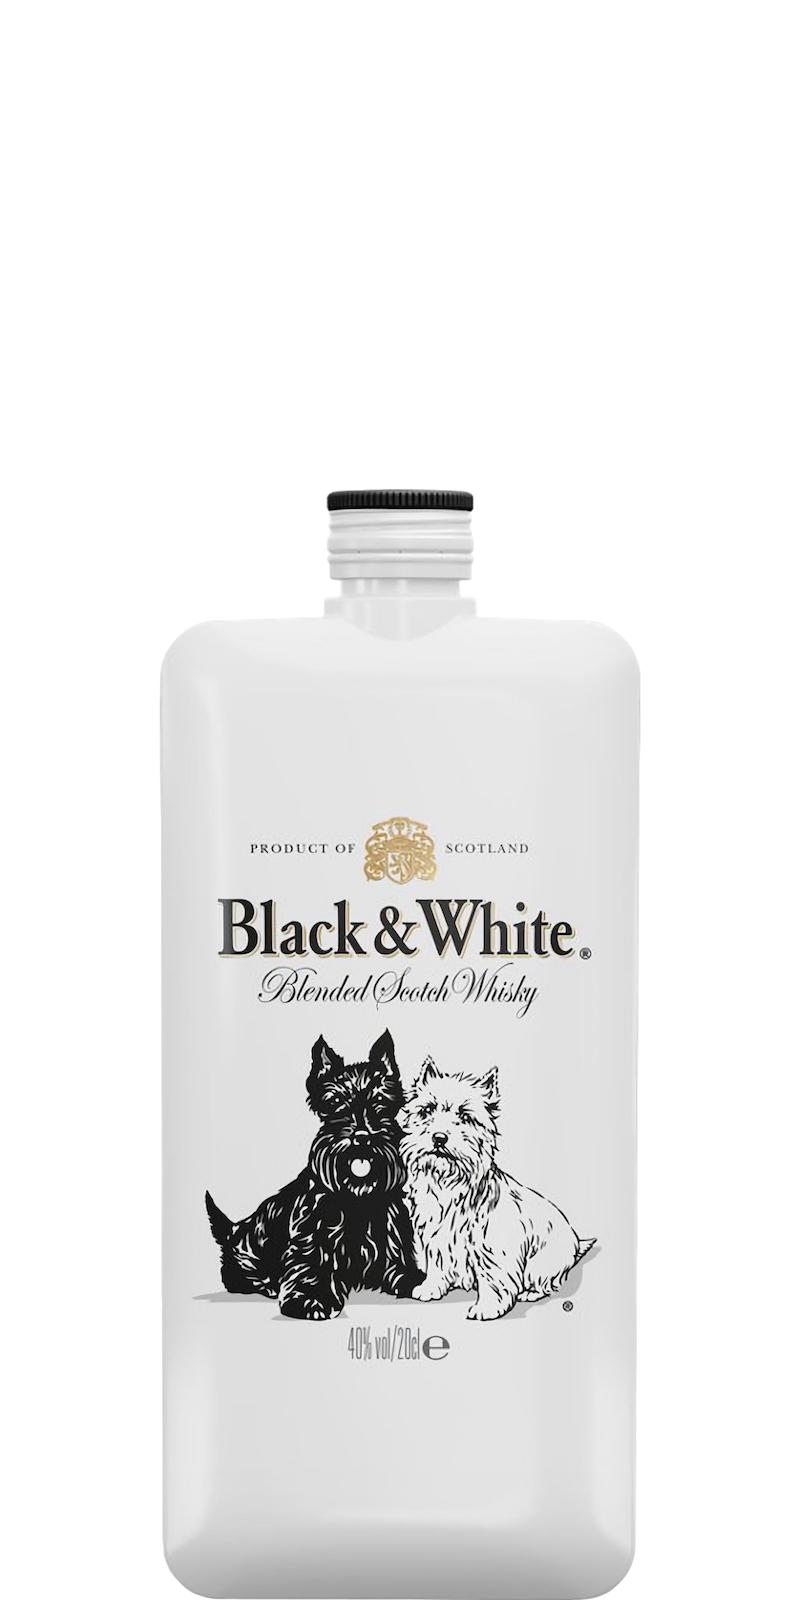 Black & White Blended Scotch Whisky - Ratings and reviews - Whiskybase